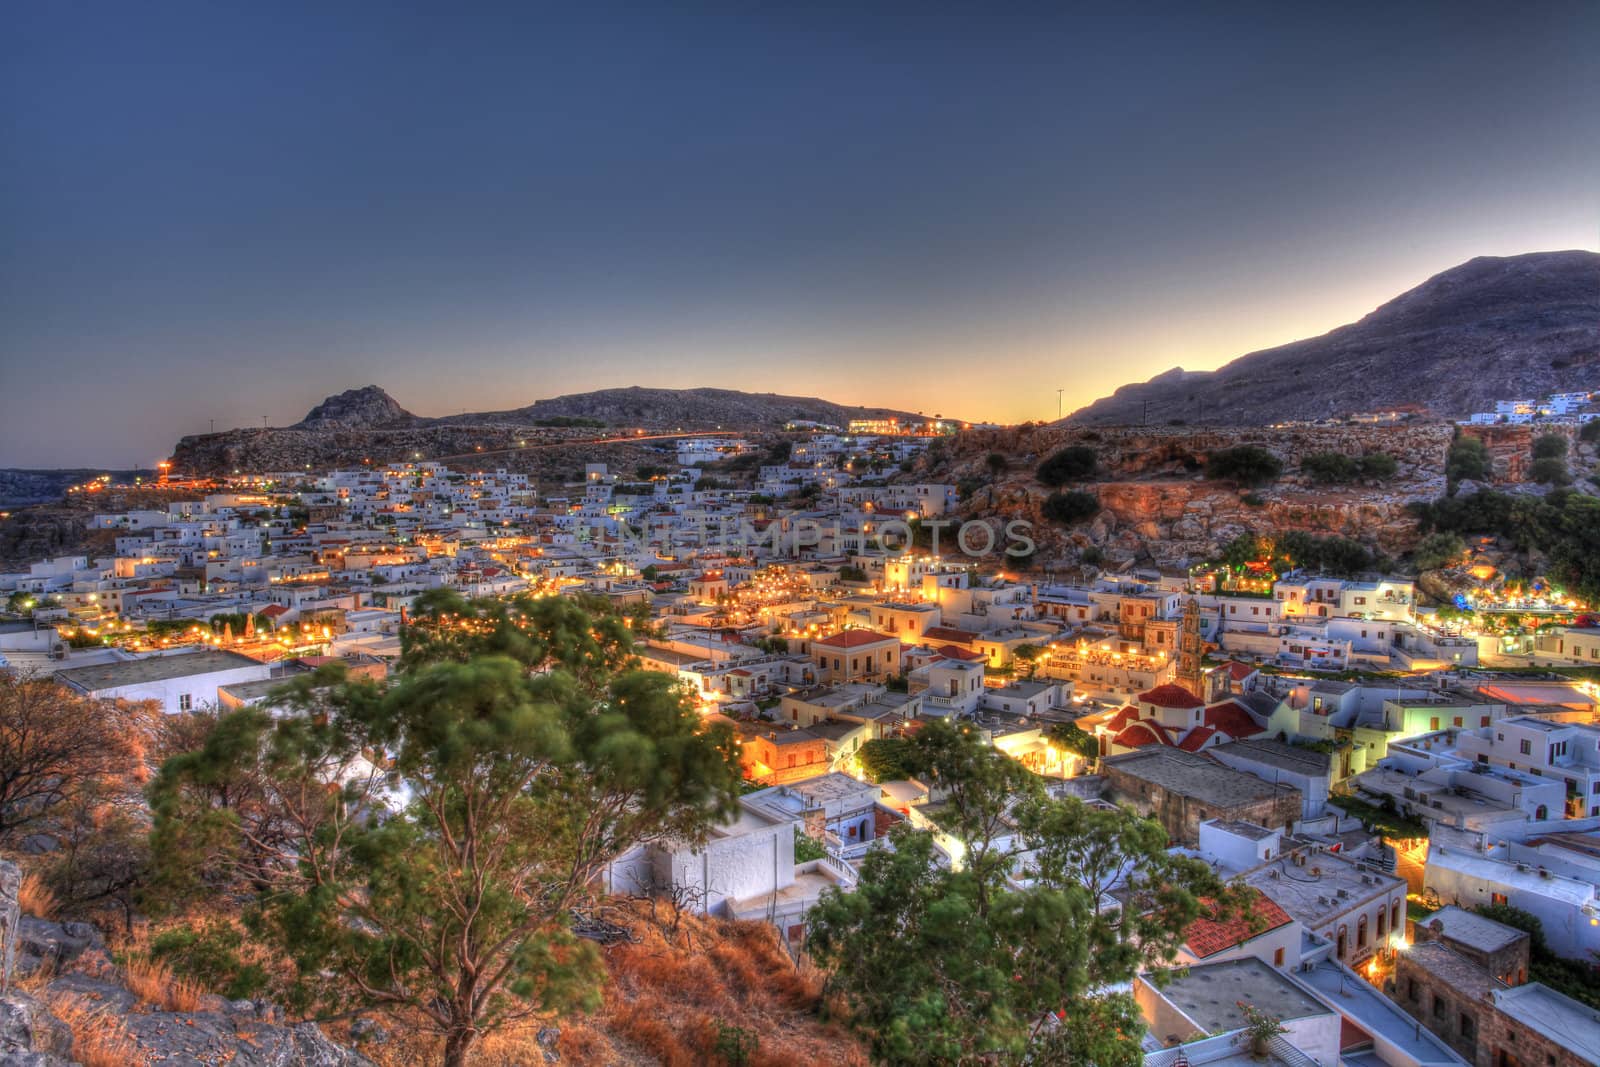 Looking over the rooftops of Lindos village at twilight in high dynamic range